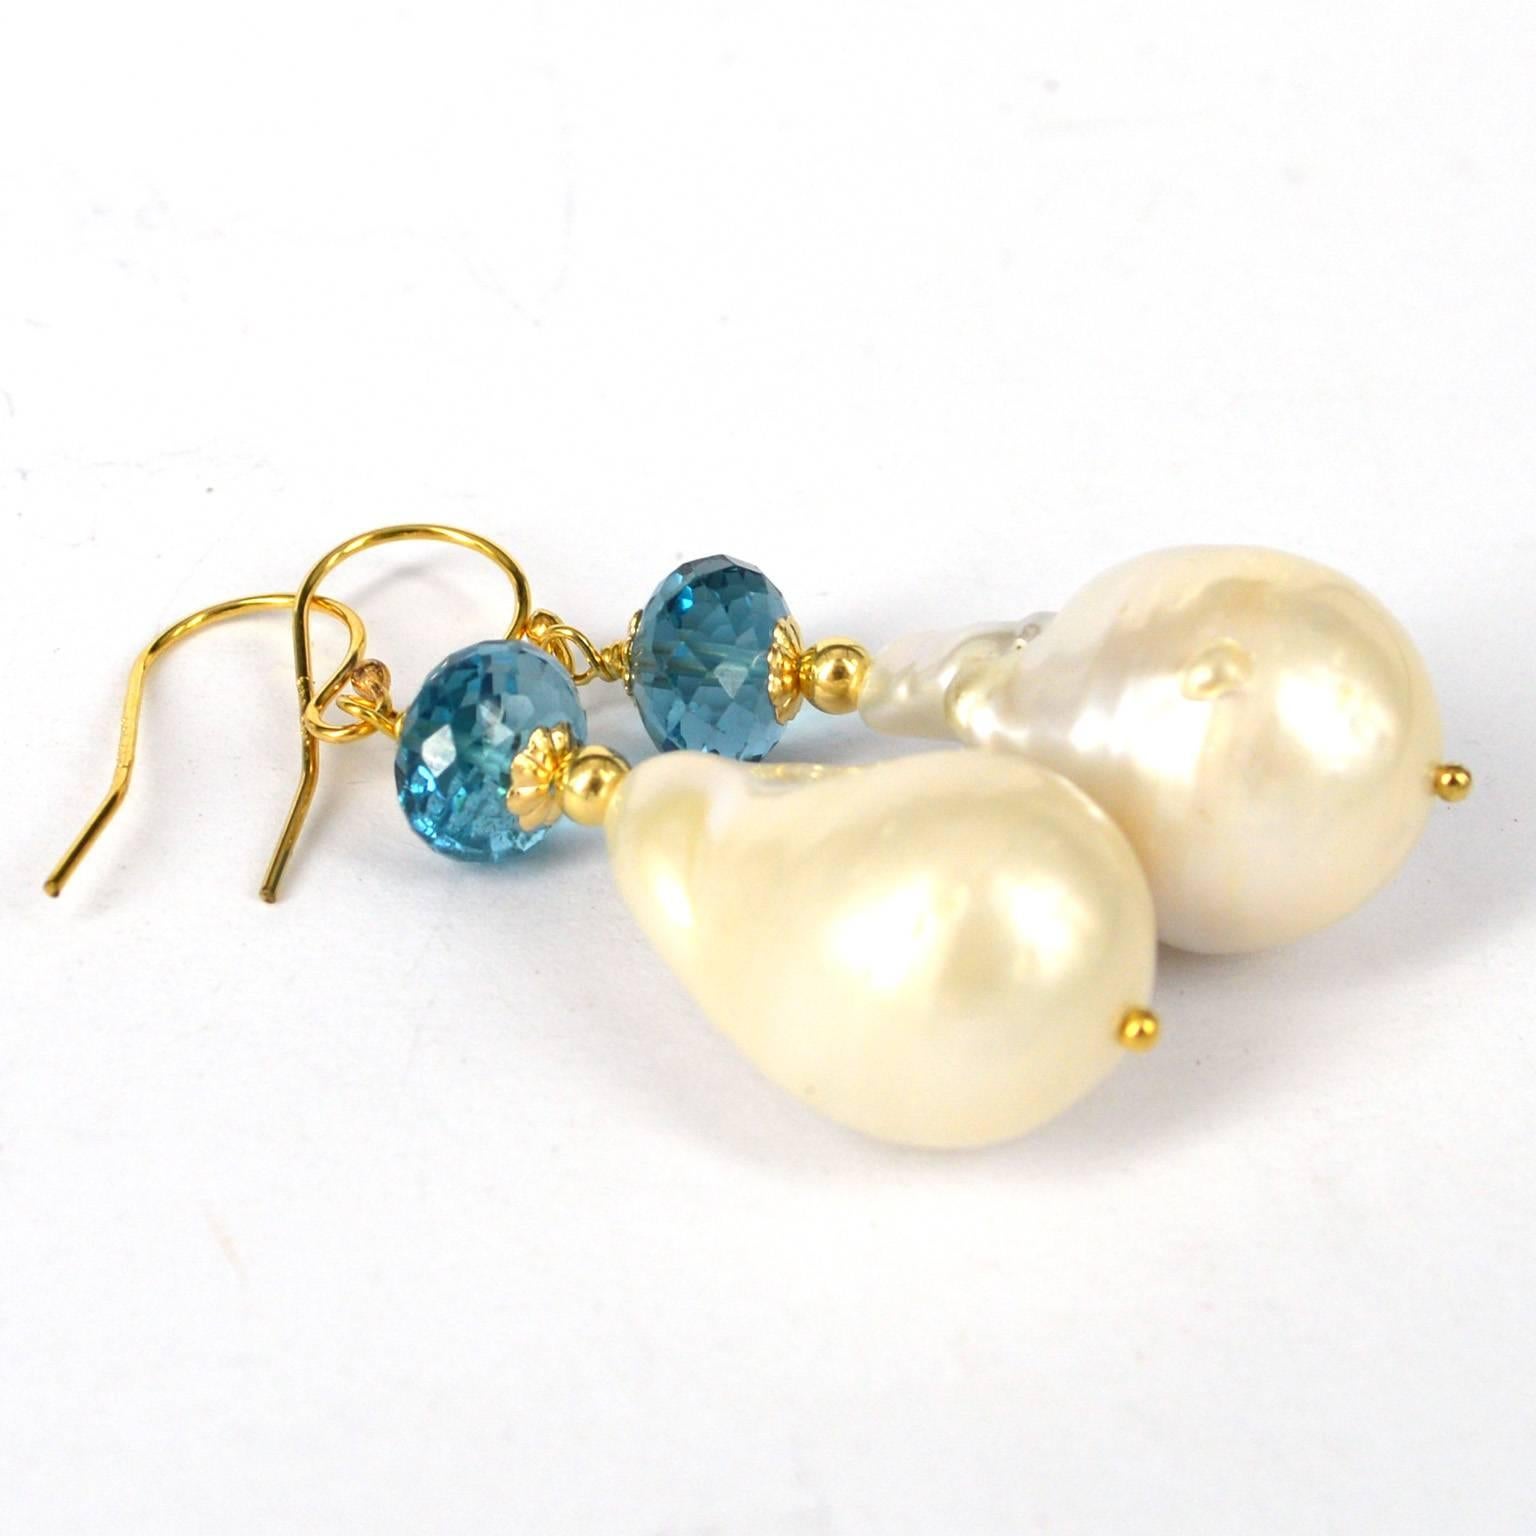 Vibrant deep blue combined with large Baroque Pearls these earrings are a statement.
London Blue Topaz stones 8x6mm with a 22x15mm Pearl, all findings are 14k Gold Filled.
Total length of earrings is 45mm